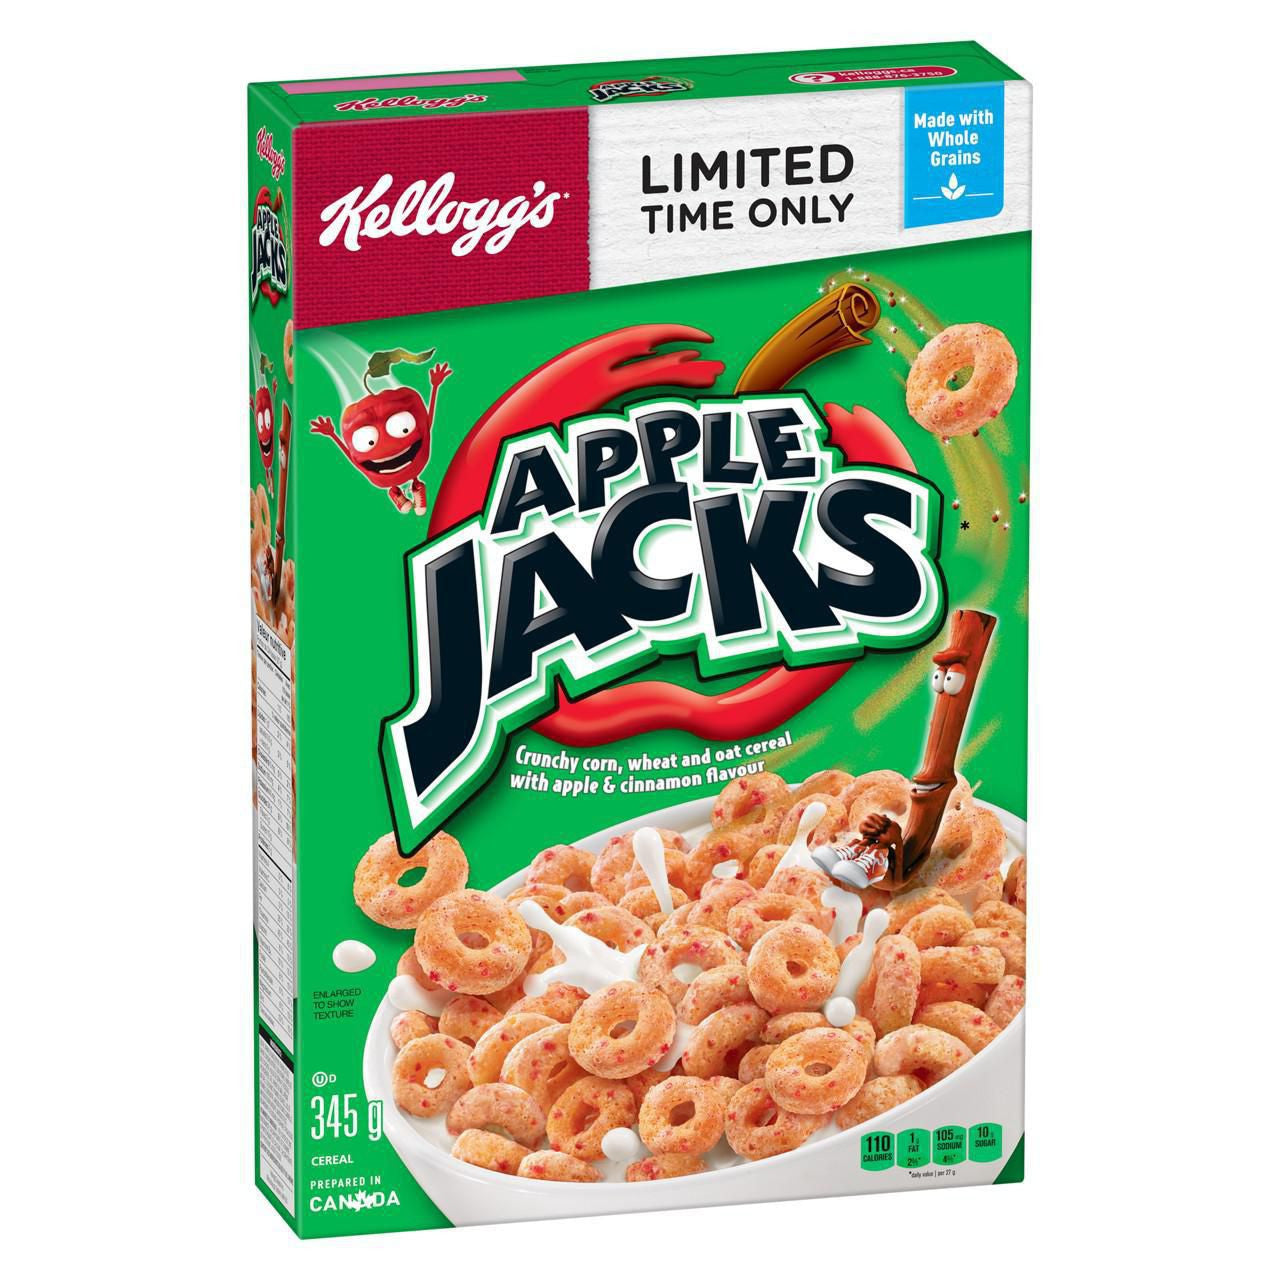 Kellogg's Apple Jack Cereal, Limited Canadian Edition, 345g/12.2 oz., {Imported from Canada}